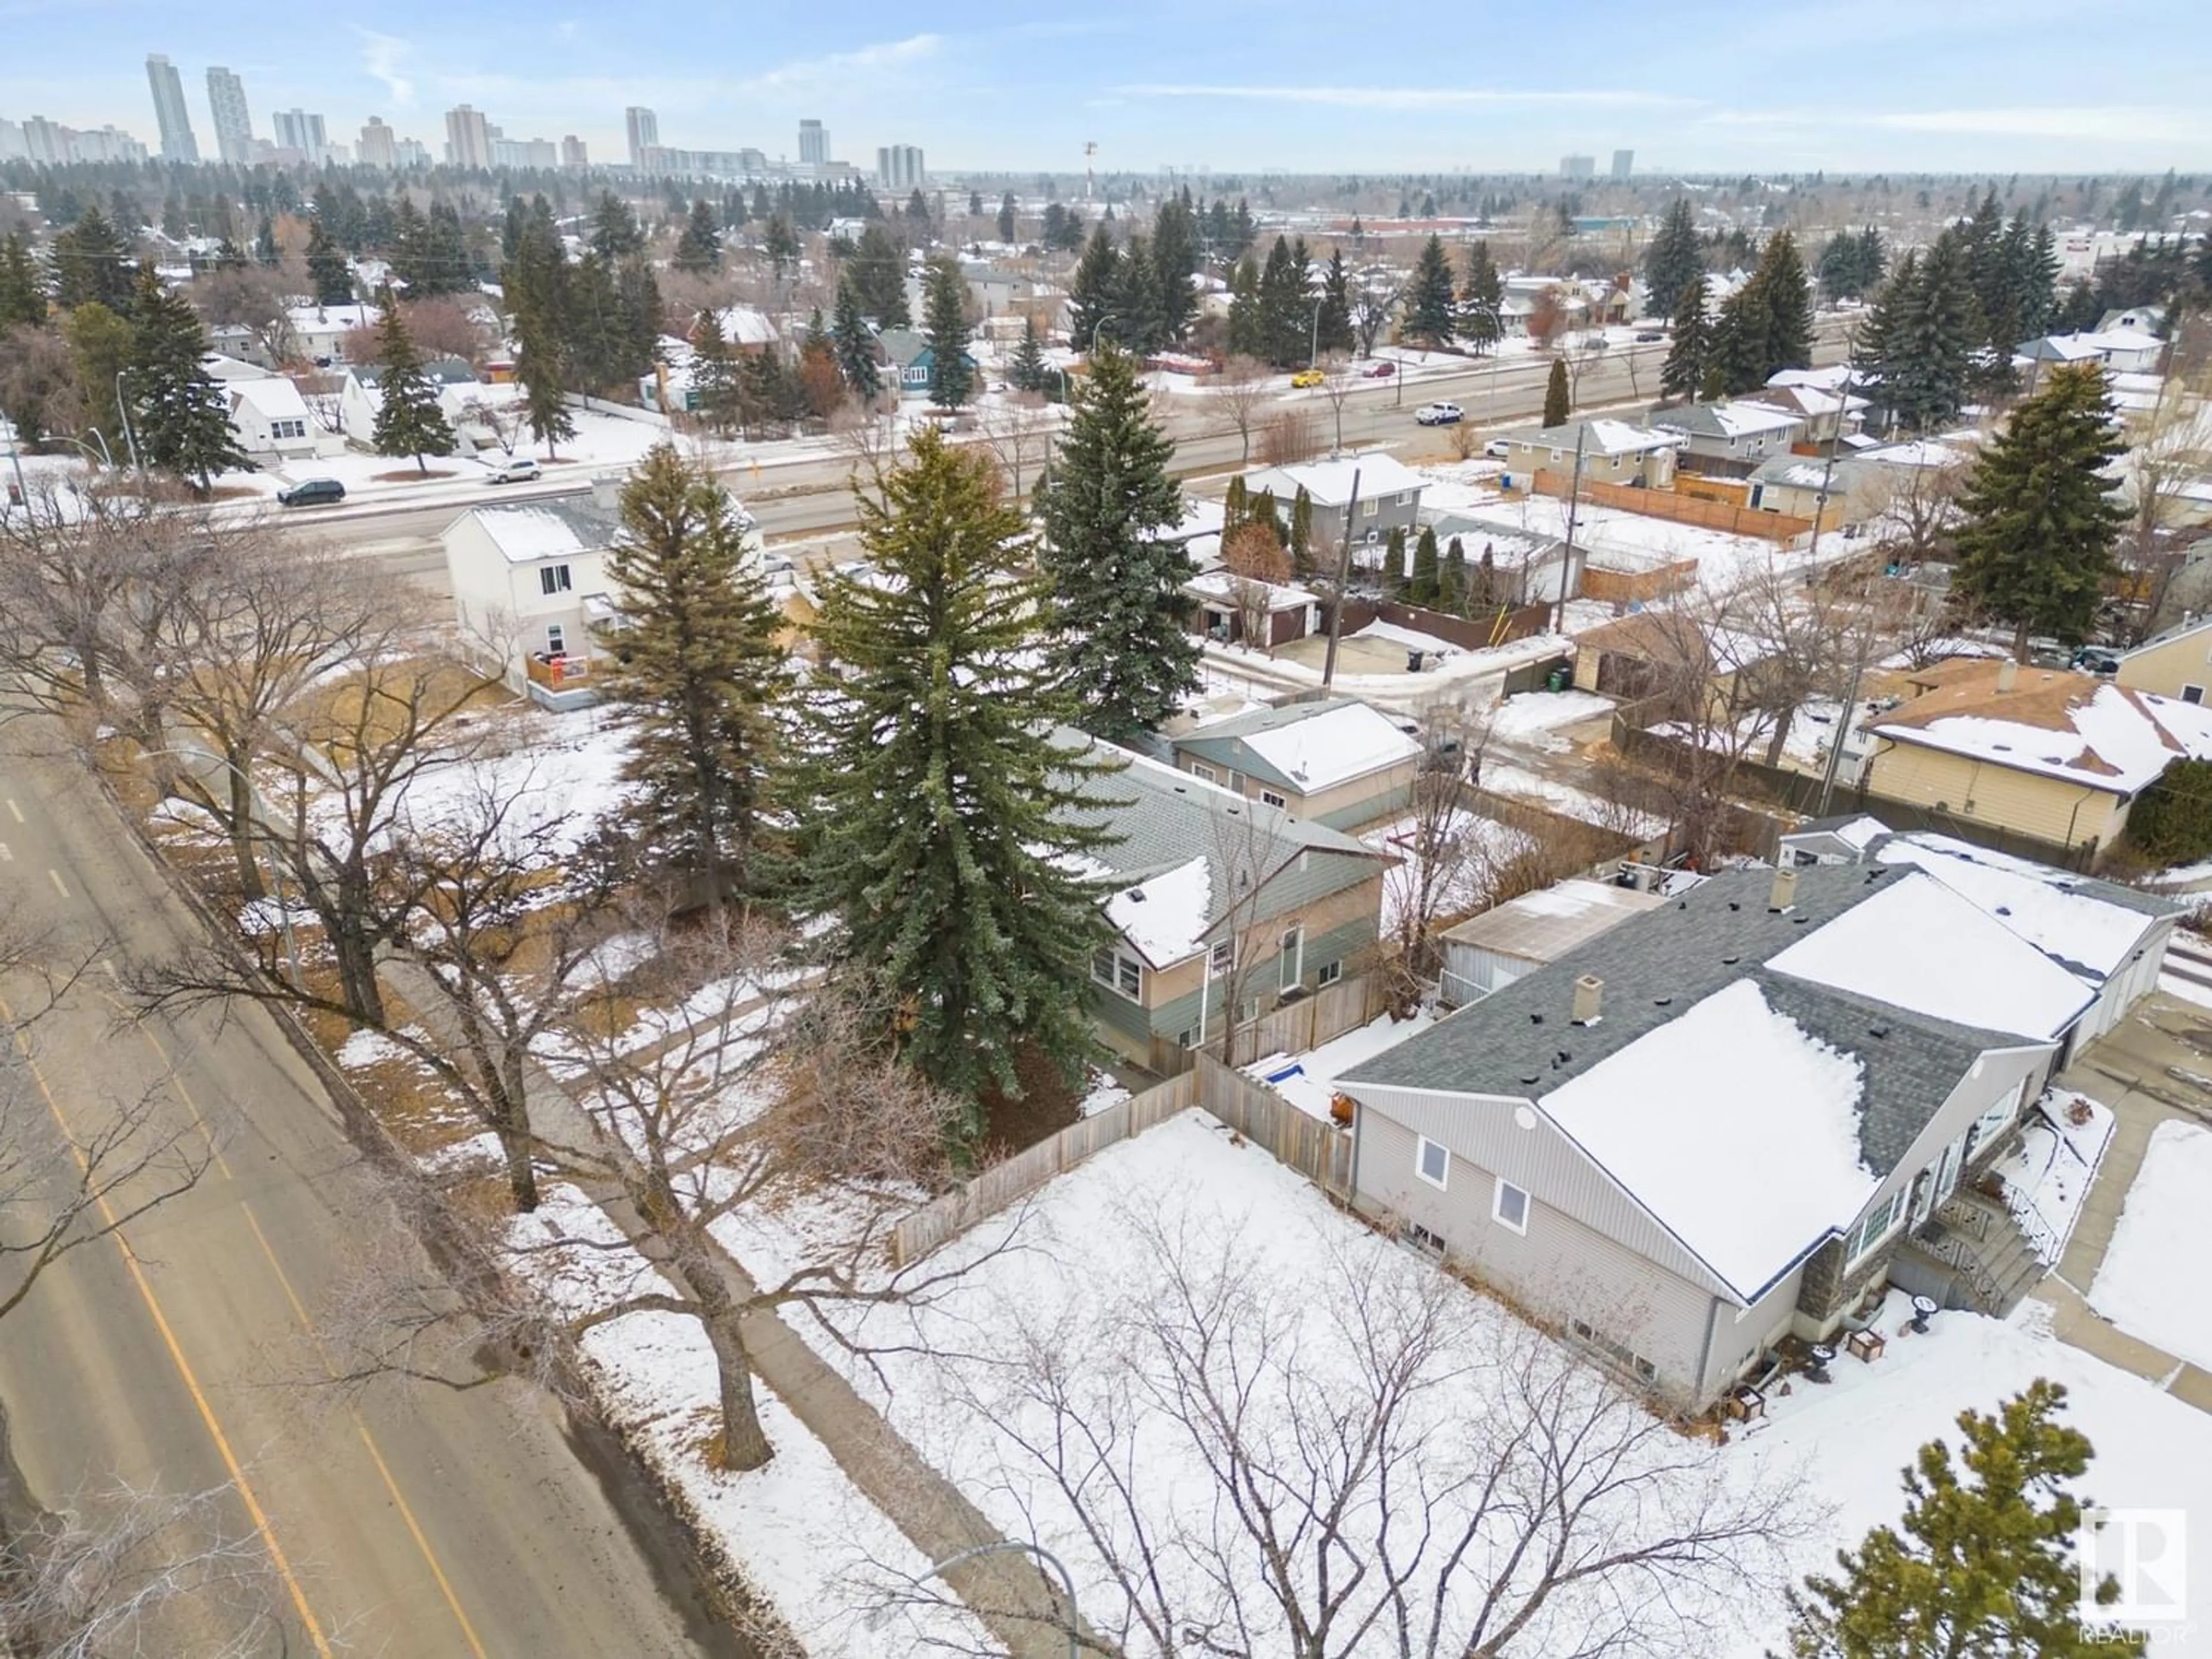 Street view for 11112/11116 116 ST NW NW, Edmonton Alberta T5G2V6